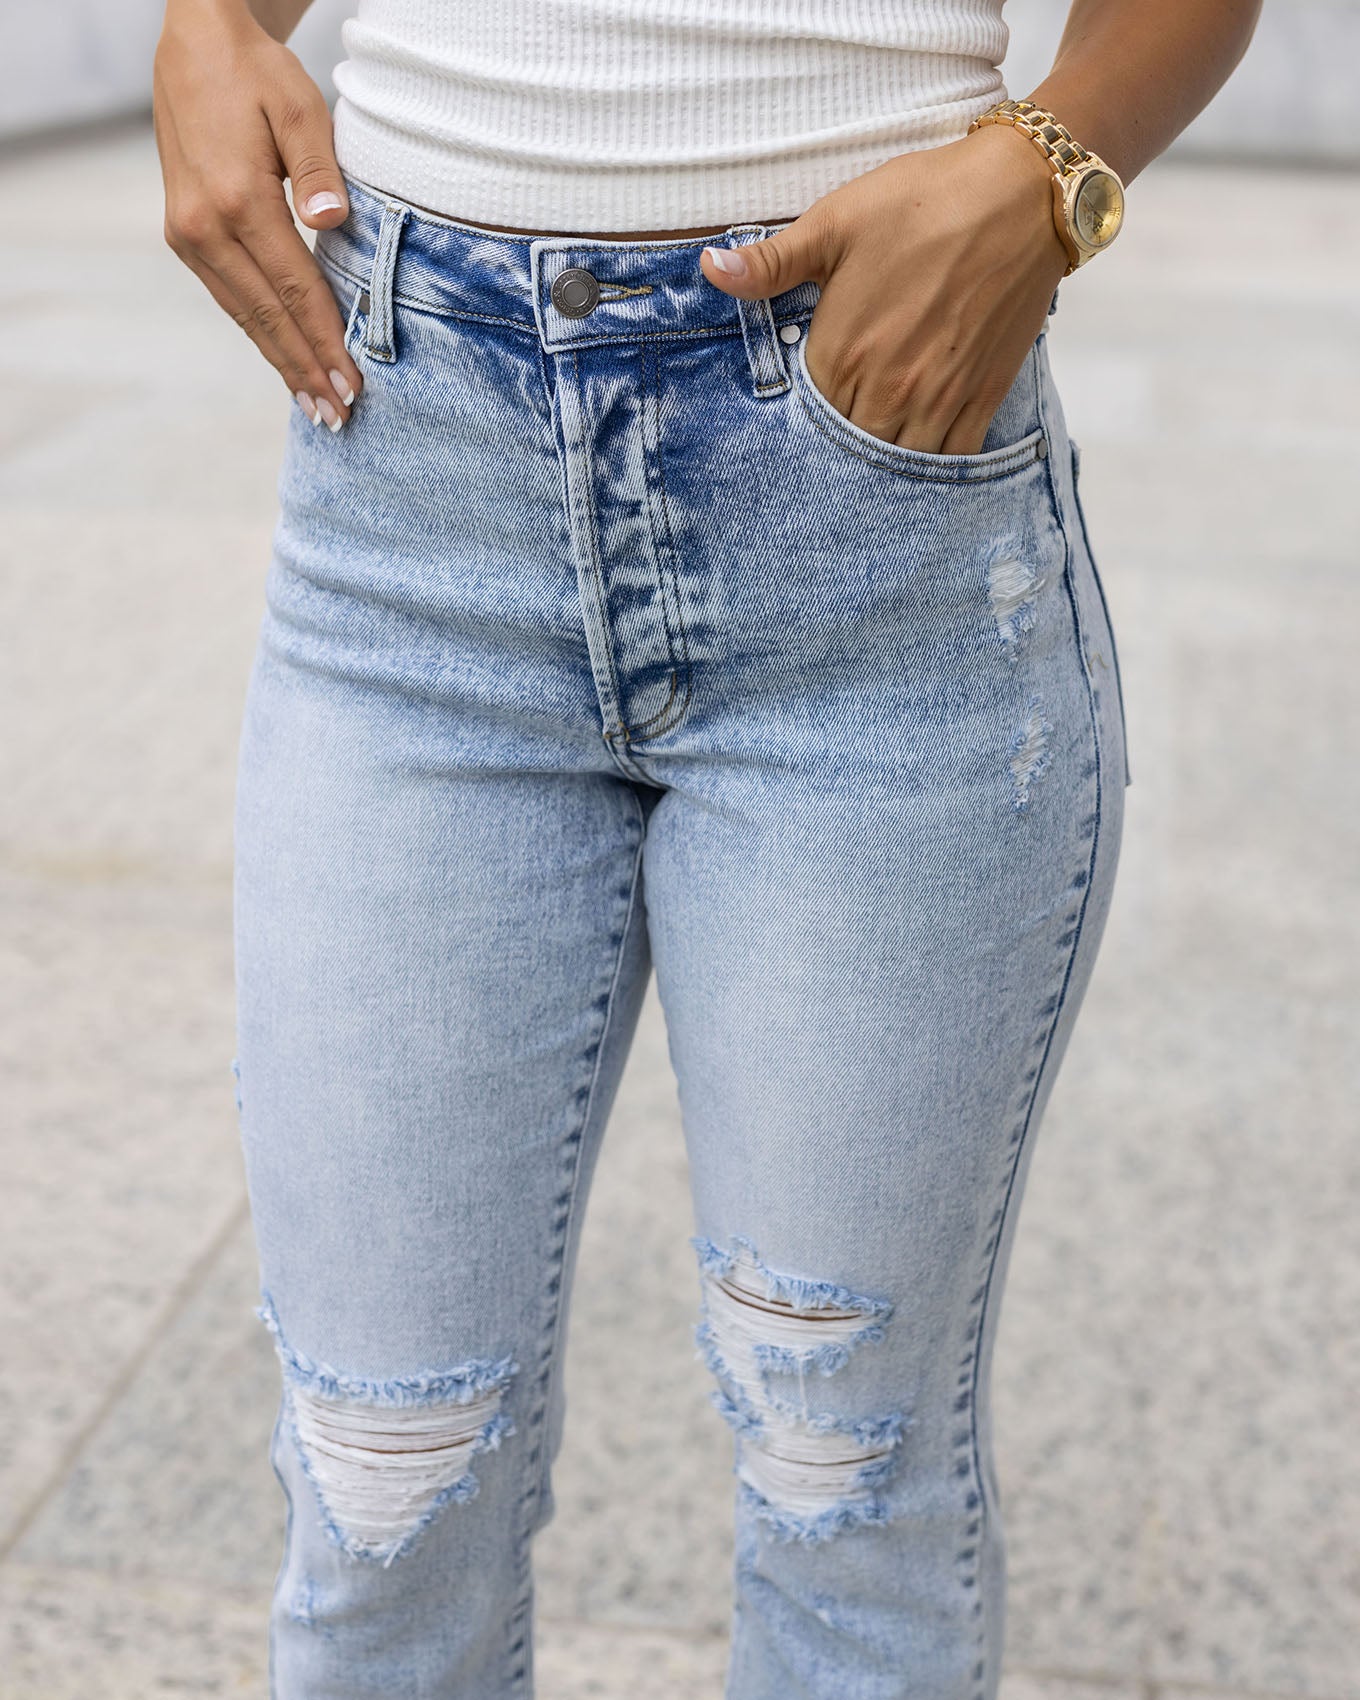 Premium Denim High Waisted Mom Jeans in Distressed Light Mid-Wash